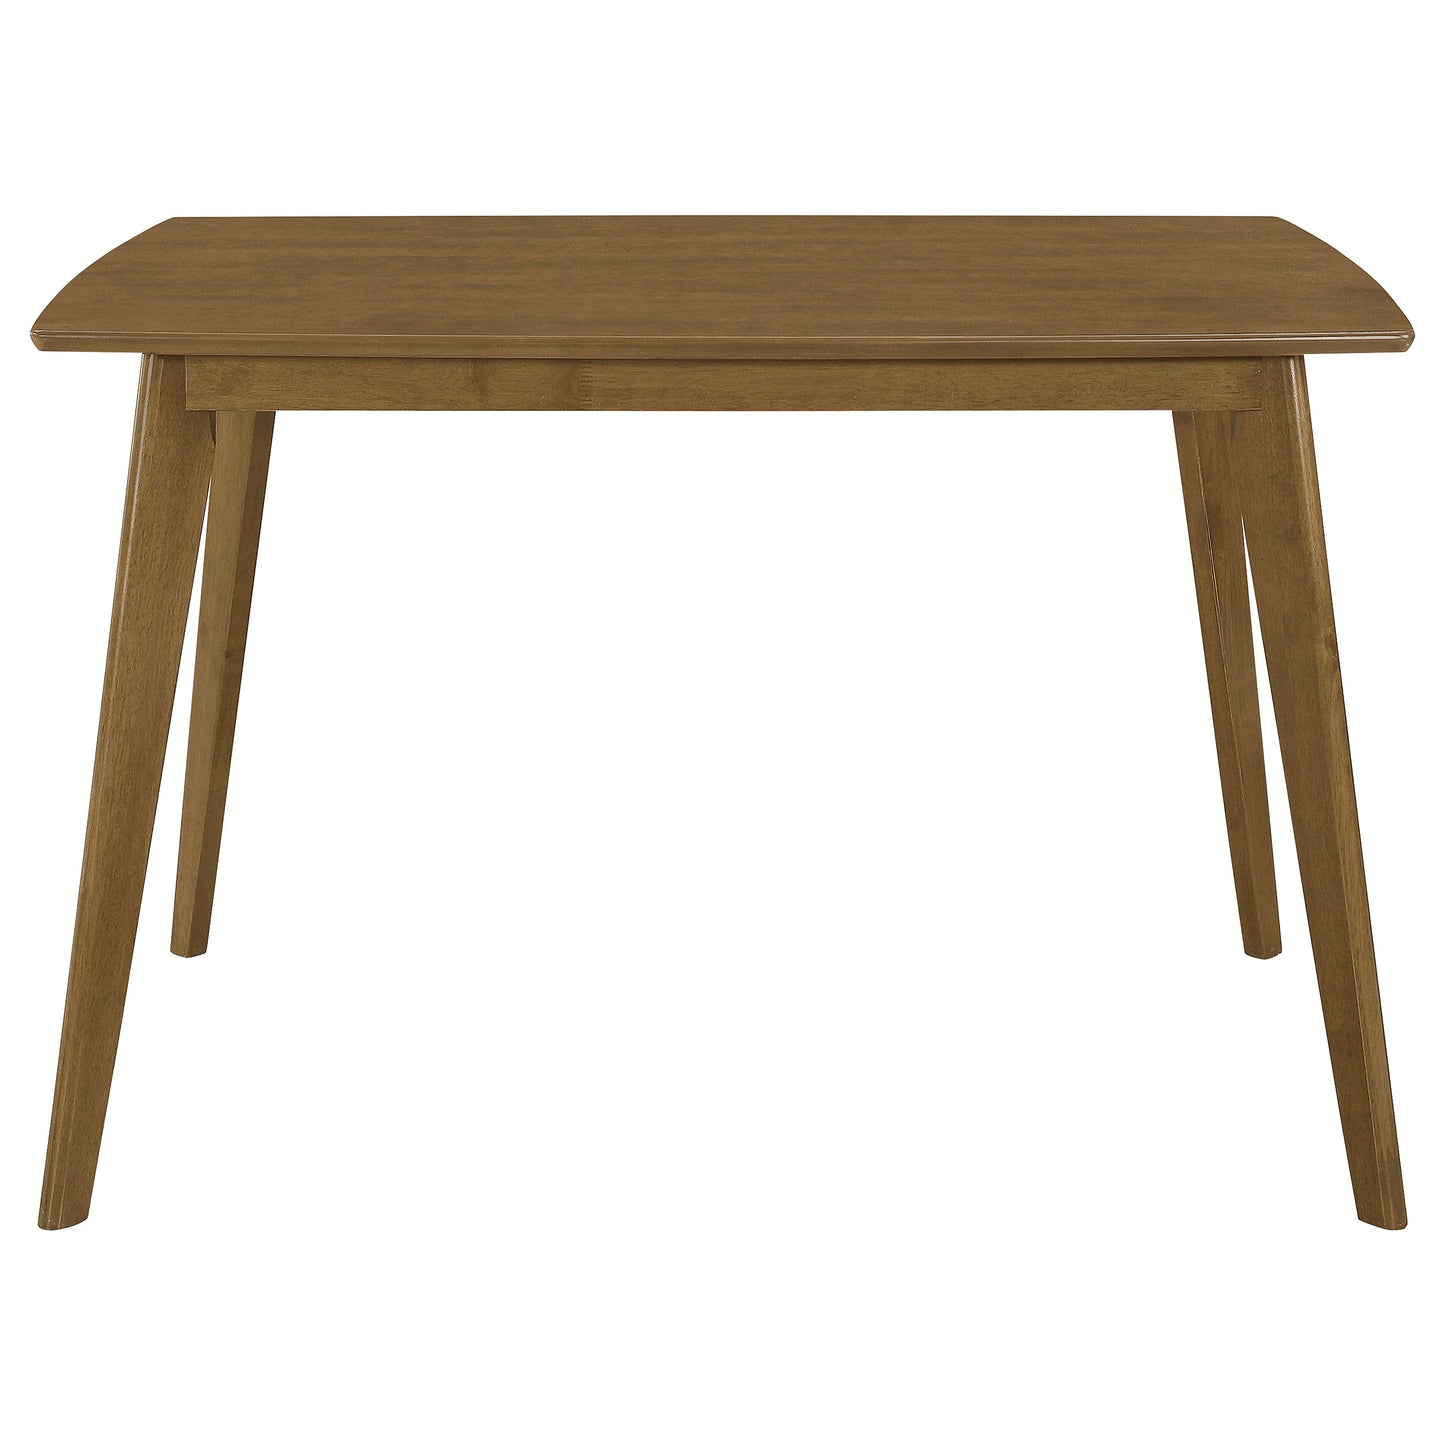 Kersey Dining Table with Angled Legs Chestnut